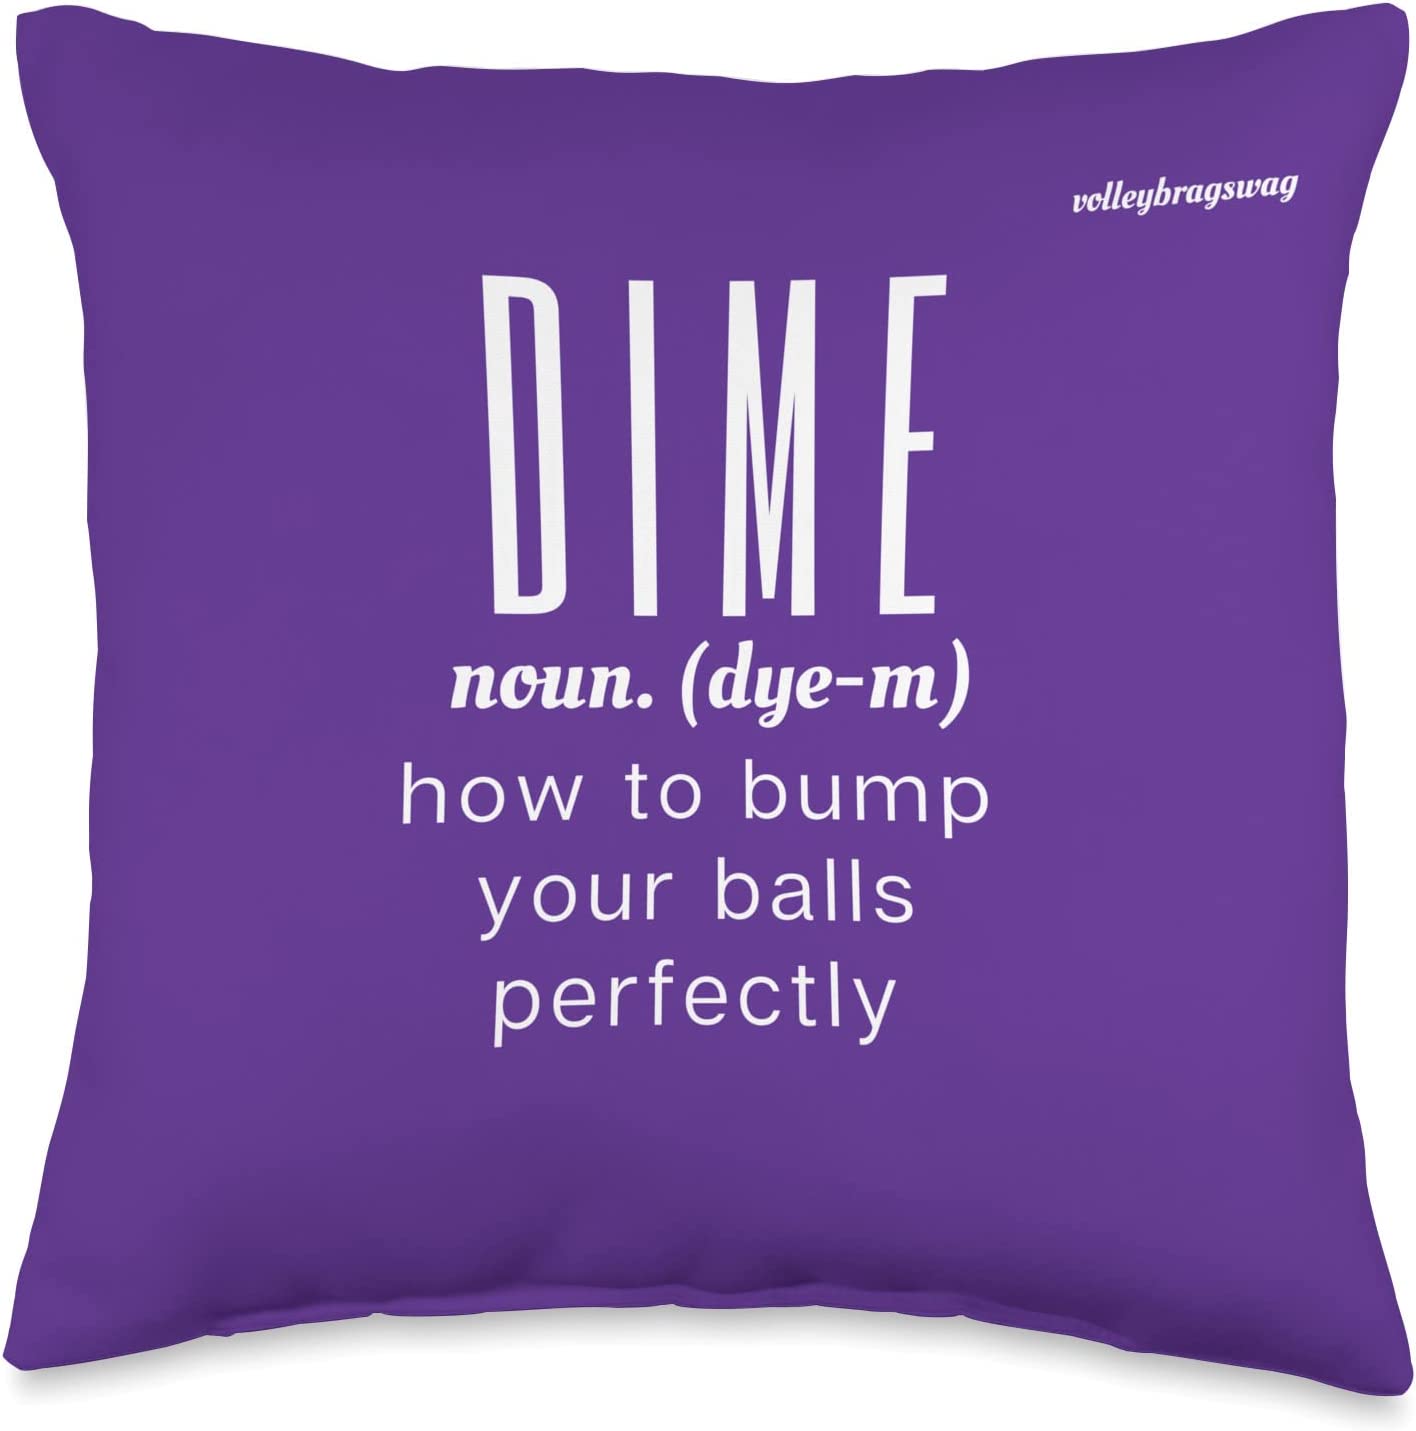 DIME (noun) How To Bump Your Balls Perfectly volleyball shirt. April Chapple, Launches a Hilarious Volleyball T-shirt Line With Fun Tongue-in-Cheek Designs sure to make players and enthusiasts laugh.